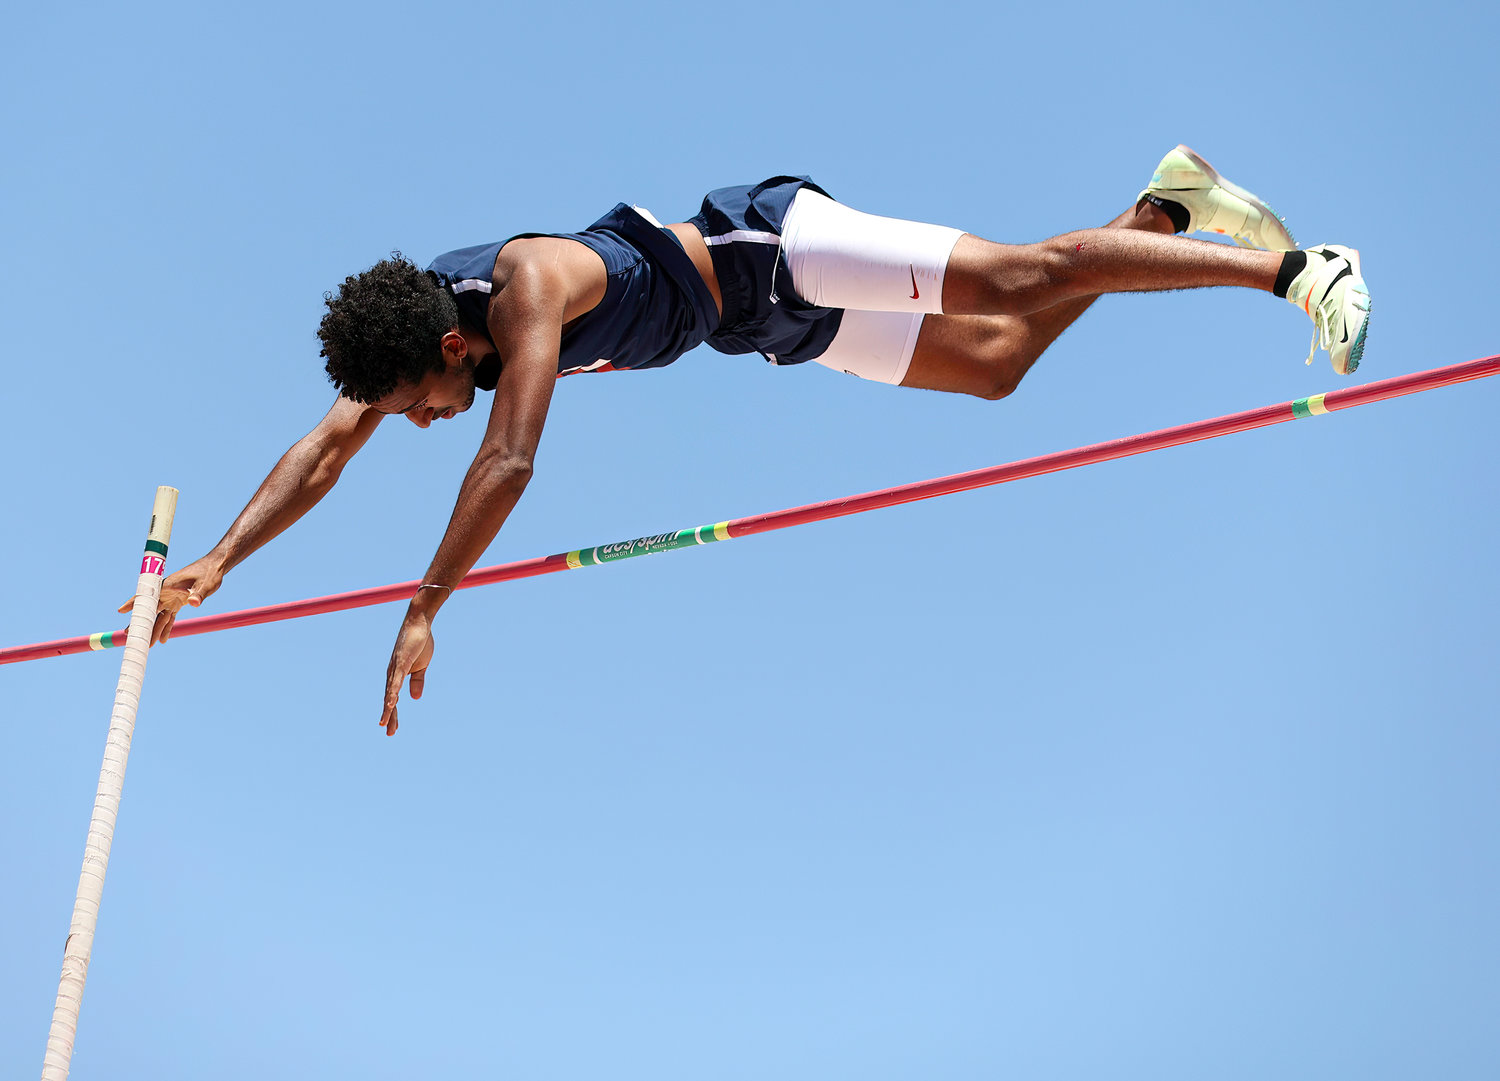 Matthew Kumar of Tompkins High School during the Class 6A boys pole vault event at the UIL State Track and Field Meet on May 14, 2022 in Austin, Texas. Kumar earned a gold medal with a jump of 16 feet, 3 inches.